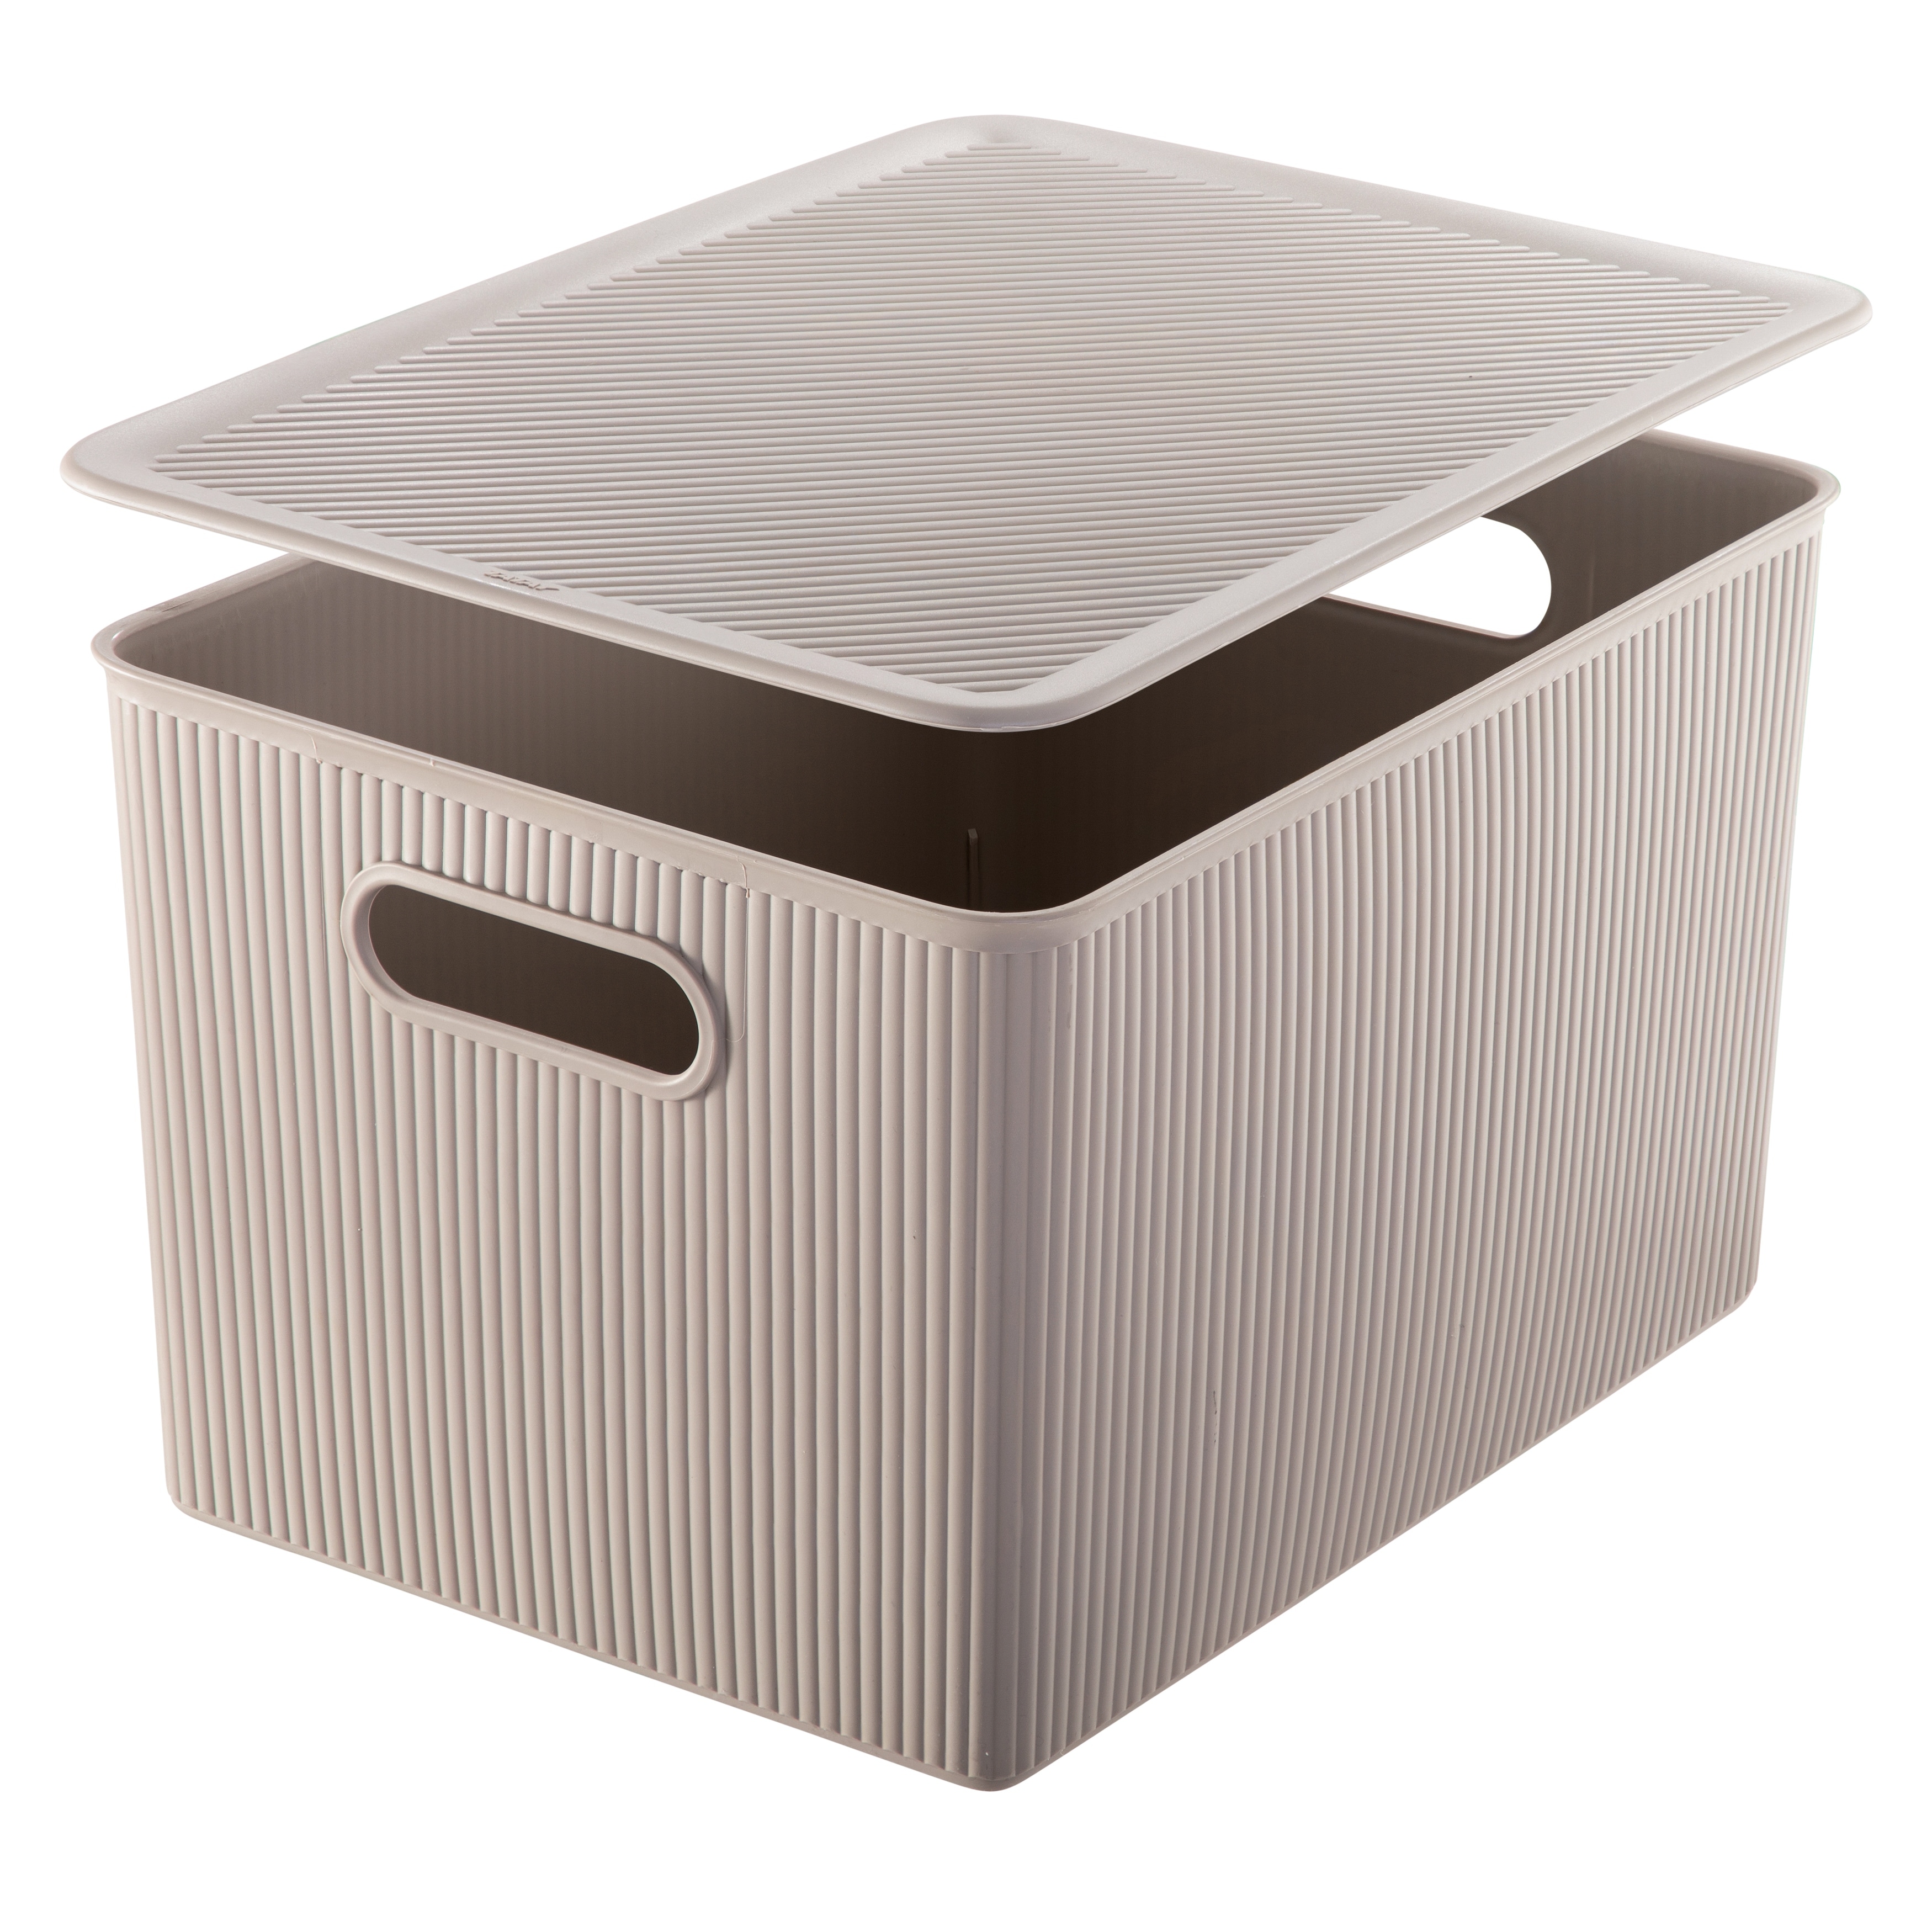 https://ak1.ostkcdn.com/images/products/is/images/direct/0bd6efb4bee143c7765491f53431a7a3461467ab/Superio-Ribbed-Storage-Bin-with-Matching-Lid.jpg